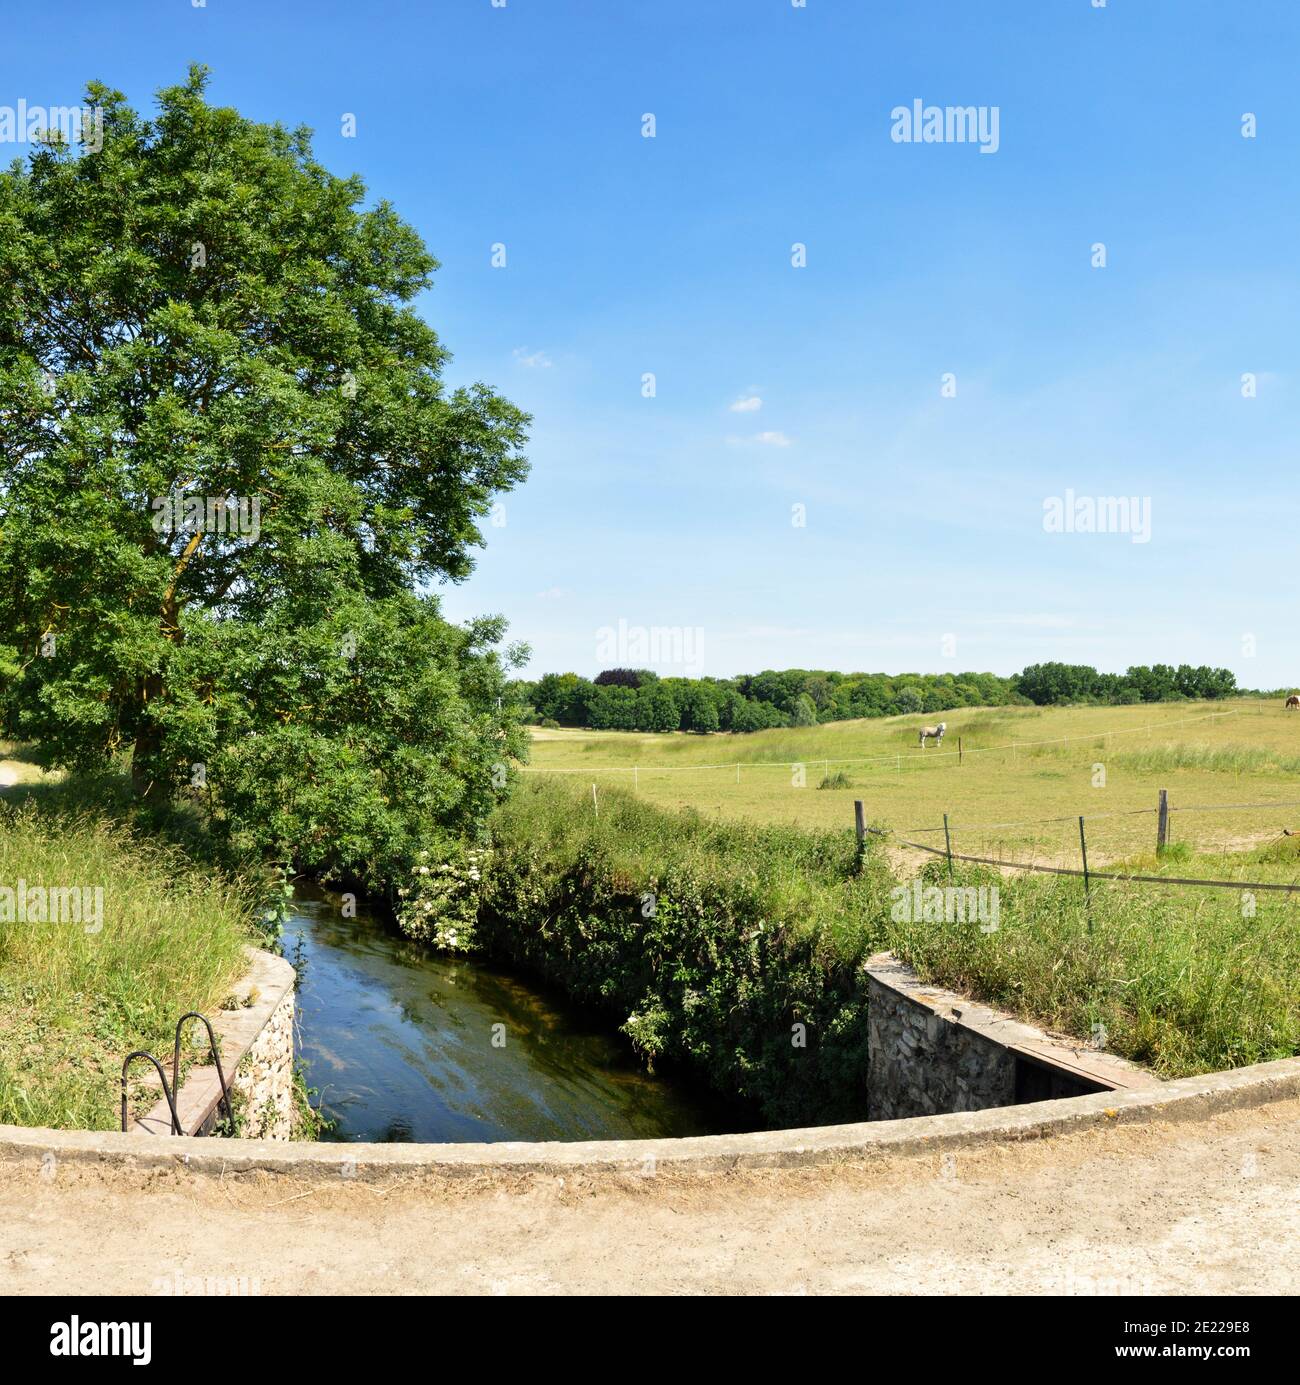 Beautiful countryside landscape under a blue sky during spring with a water court Stock Photo